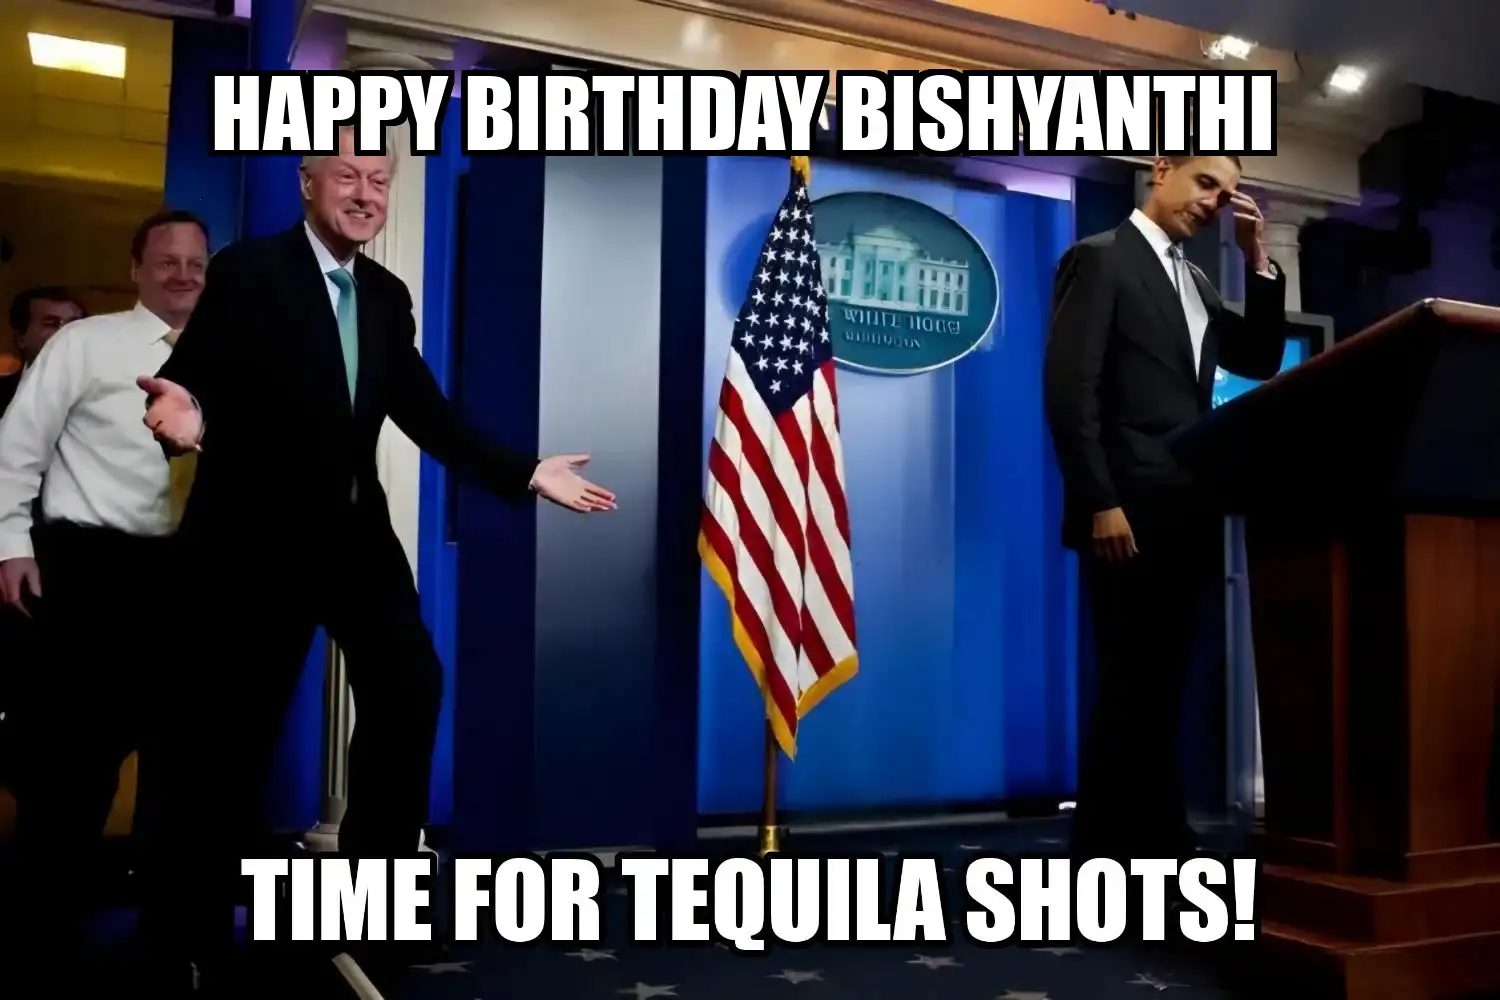 Happy Birthday Bishyanthi Time For Tequila Shots Memes